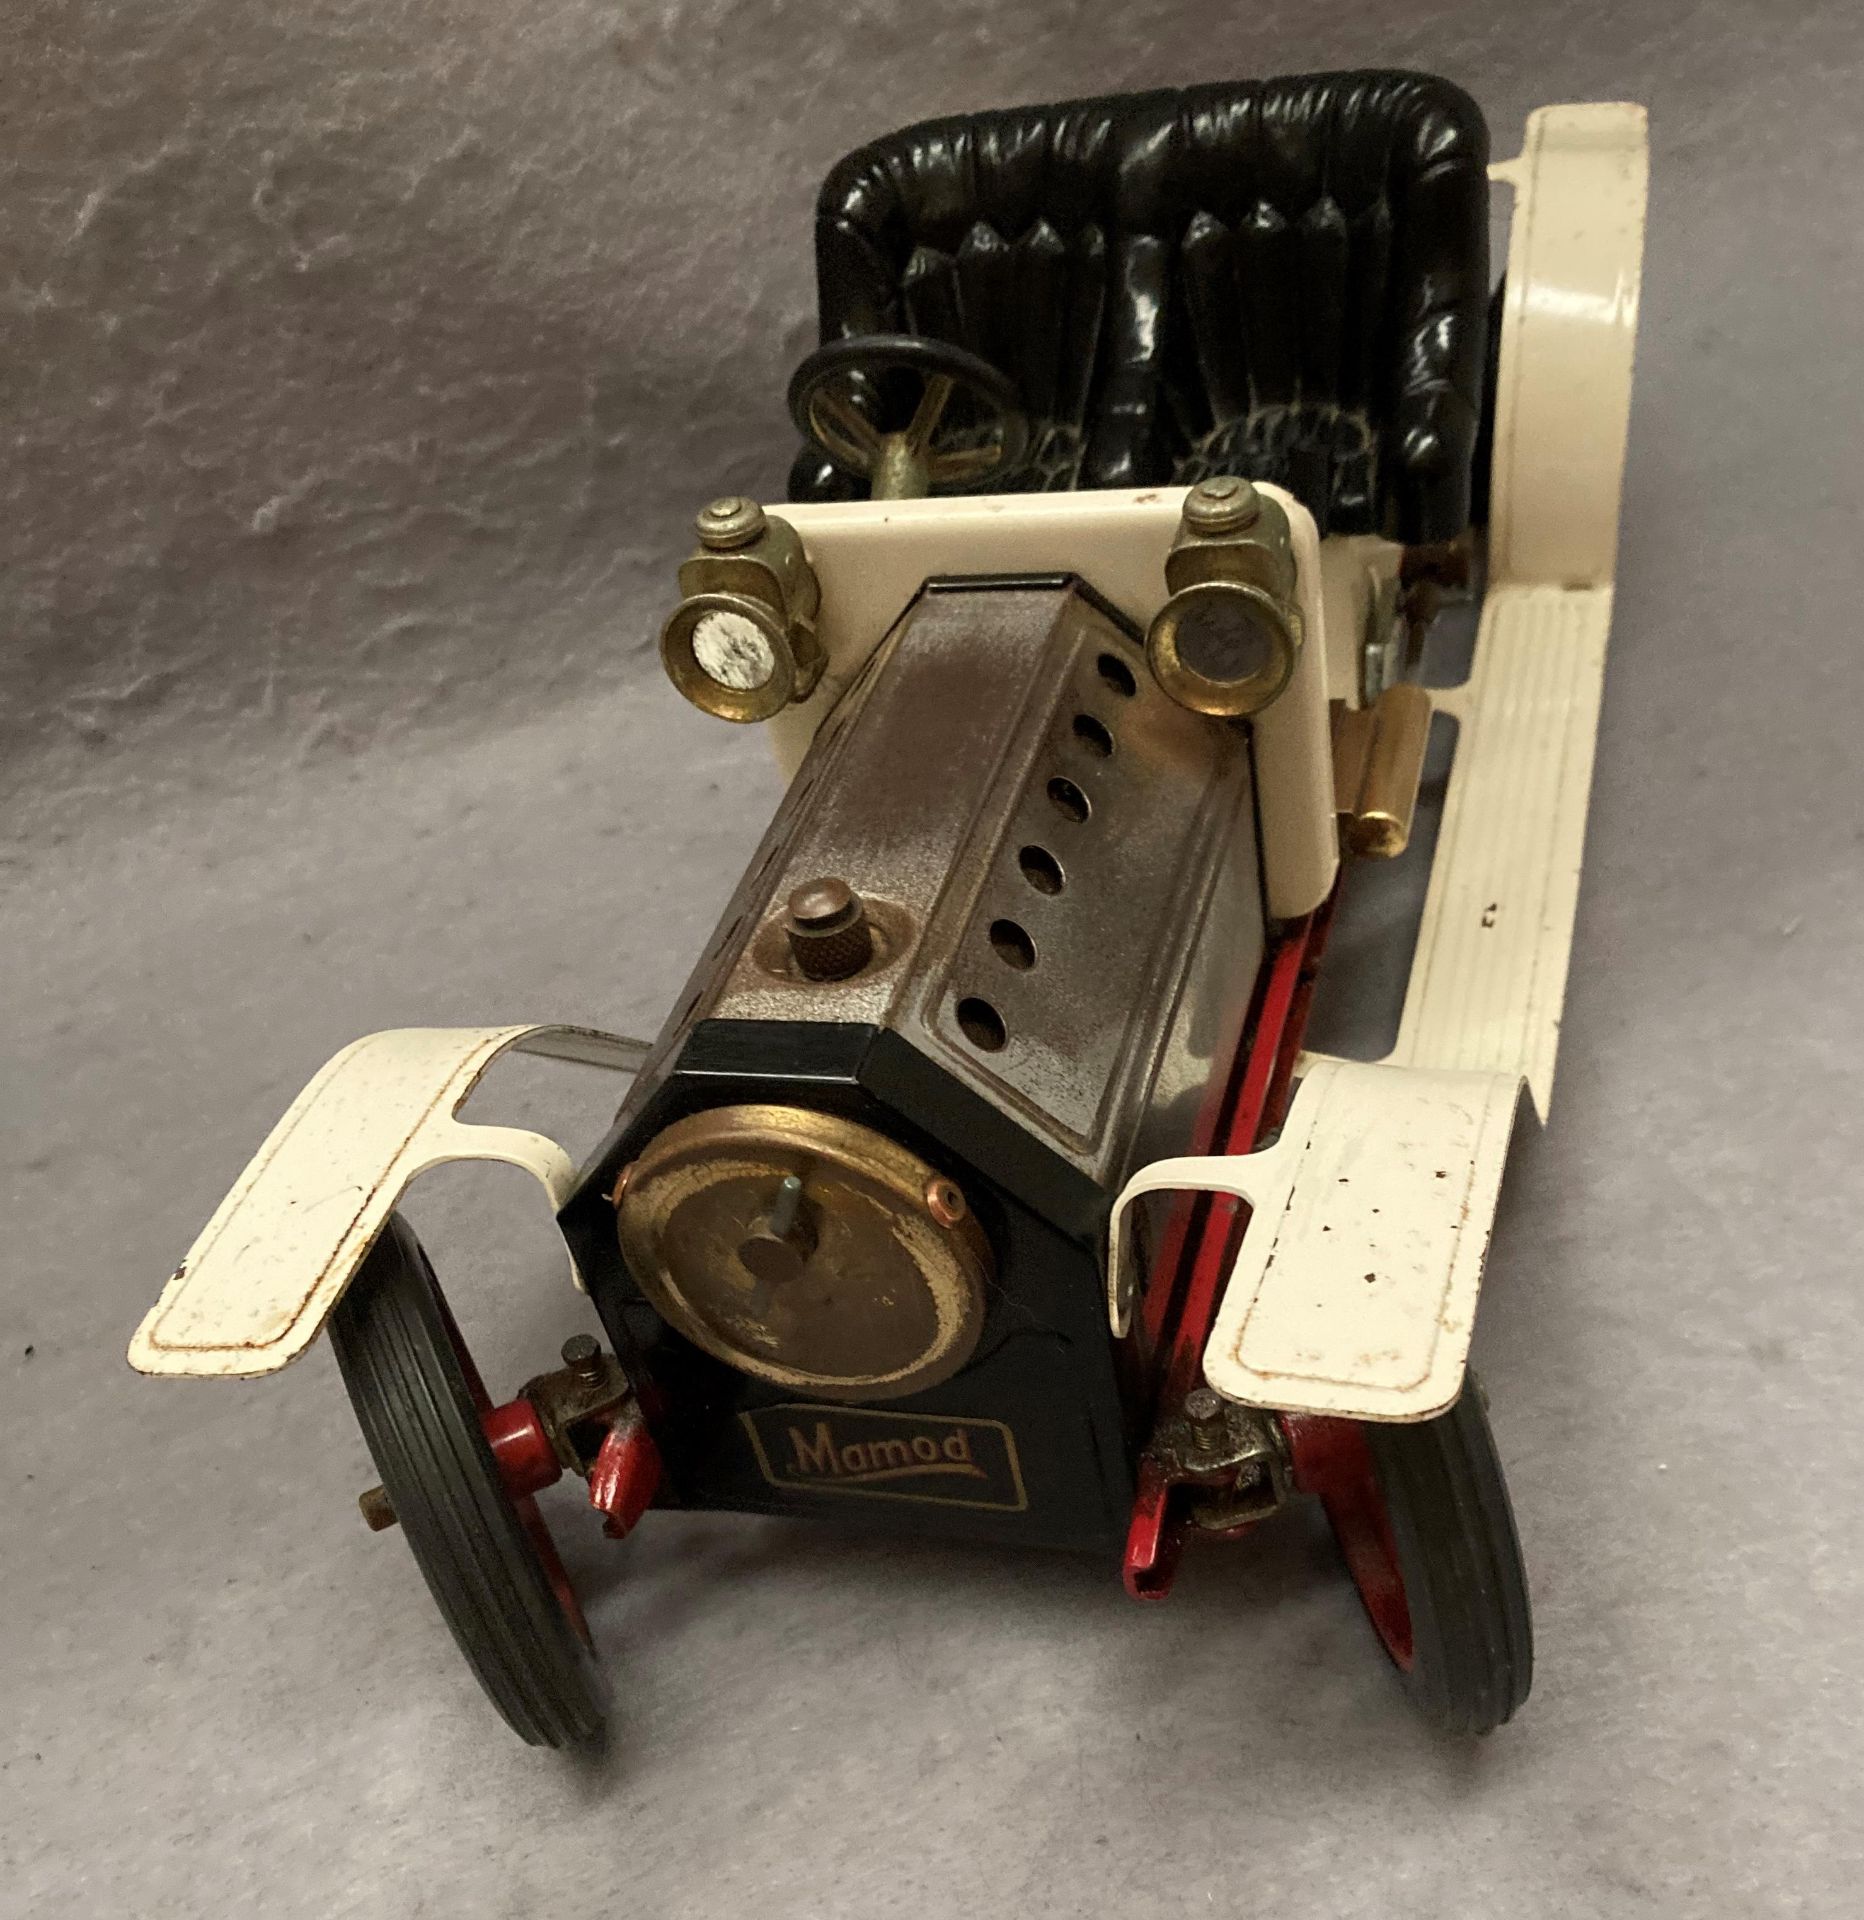 A Mamod scale model steam car, 40cm long, - Image 2 of 5